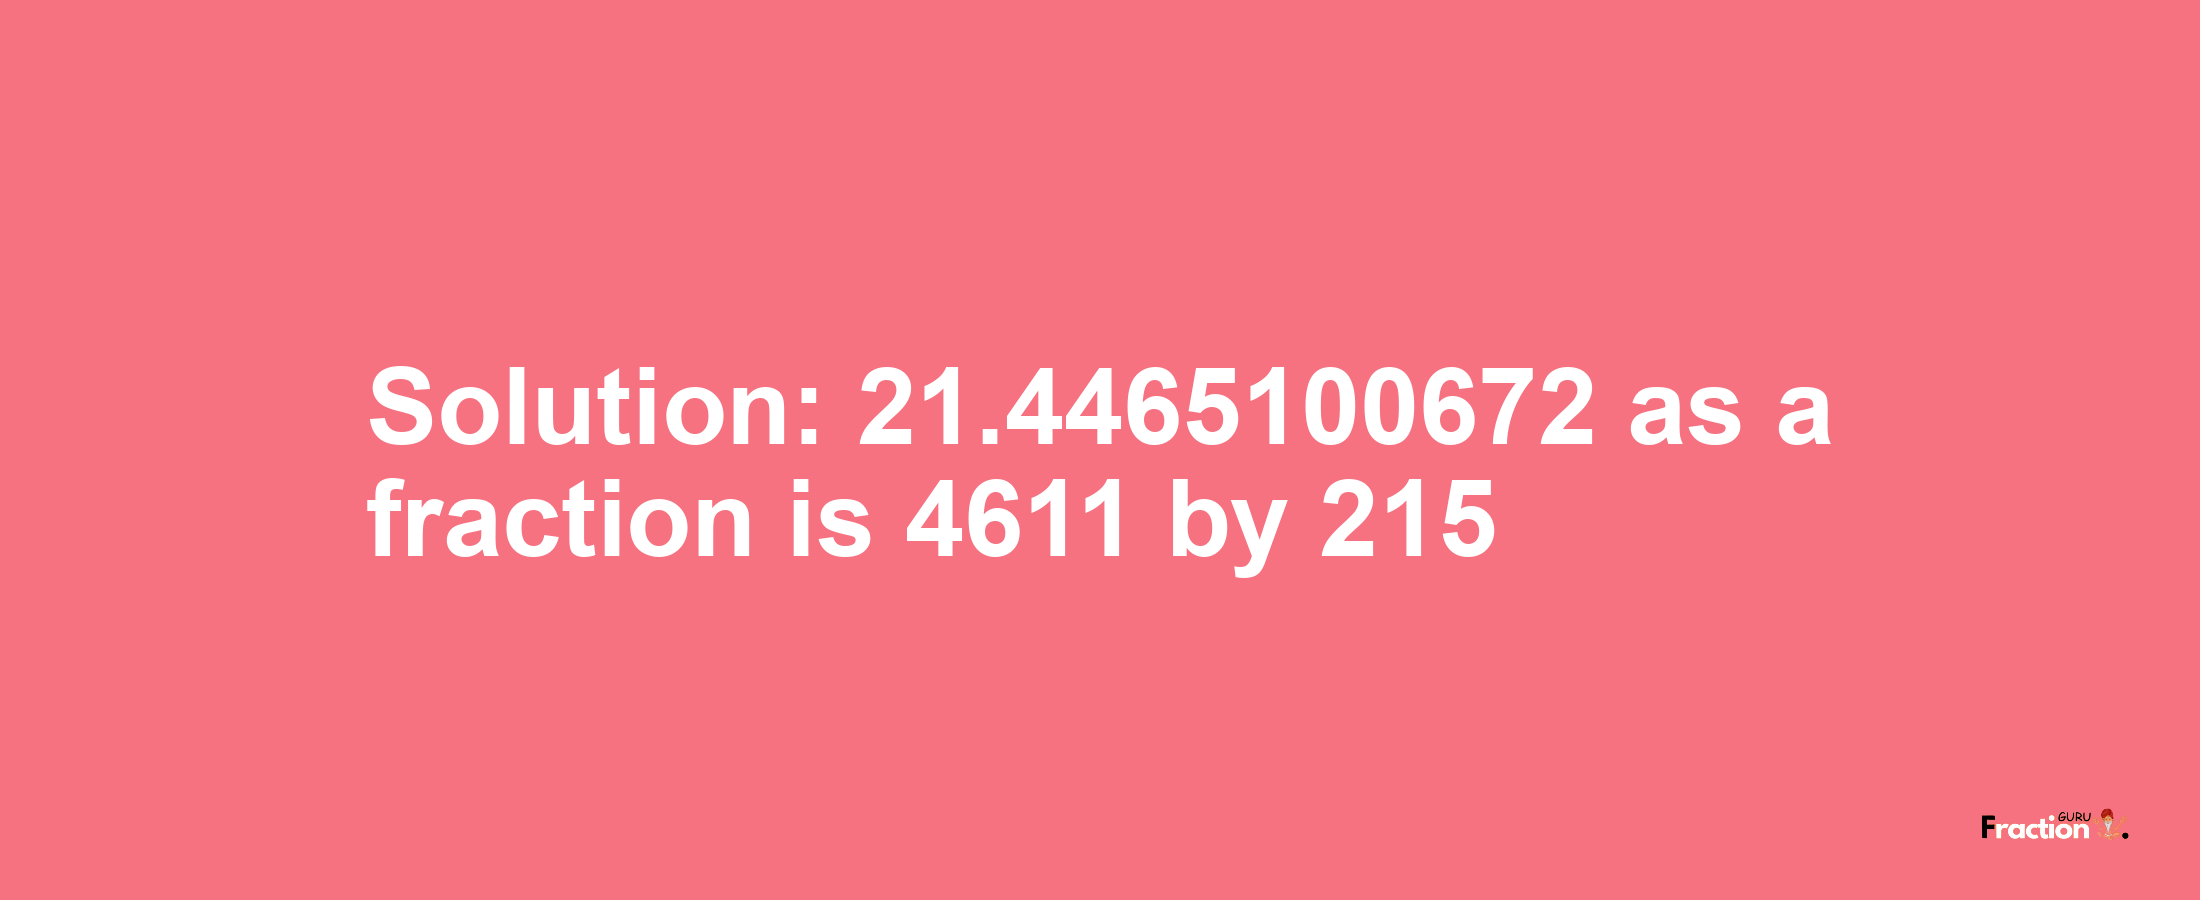 Solution:21.4465100672 as a fraction is 4611/215